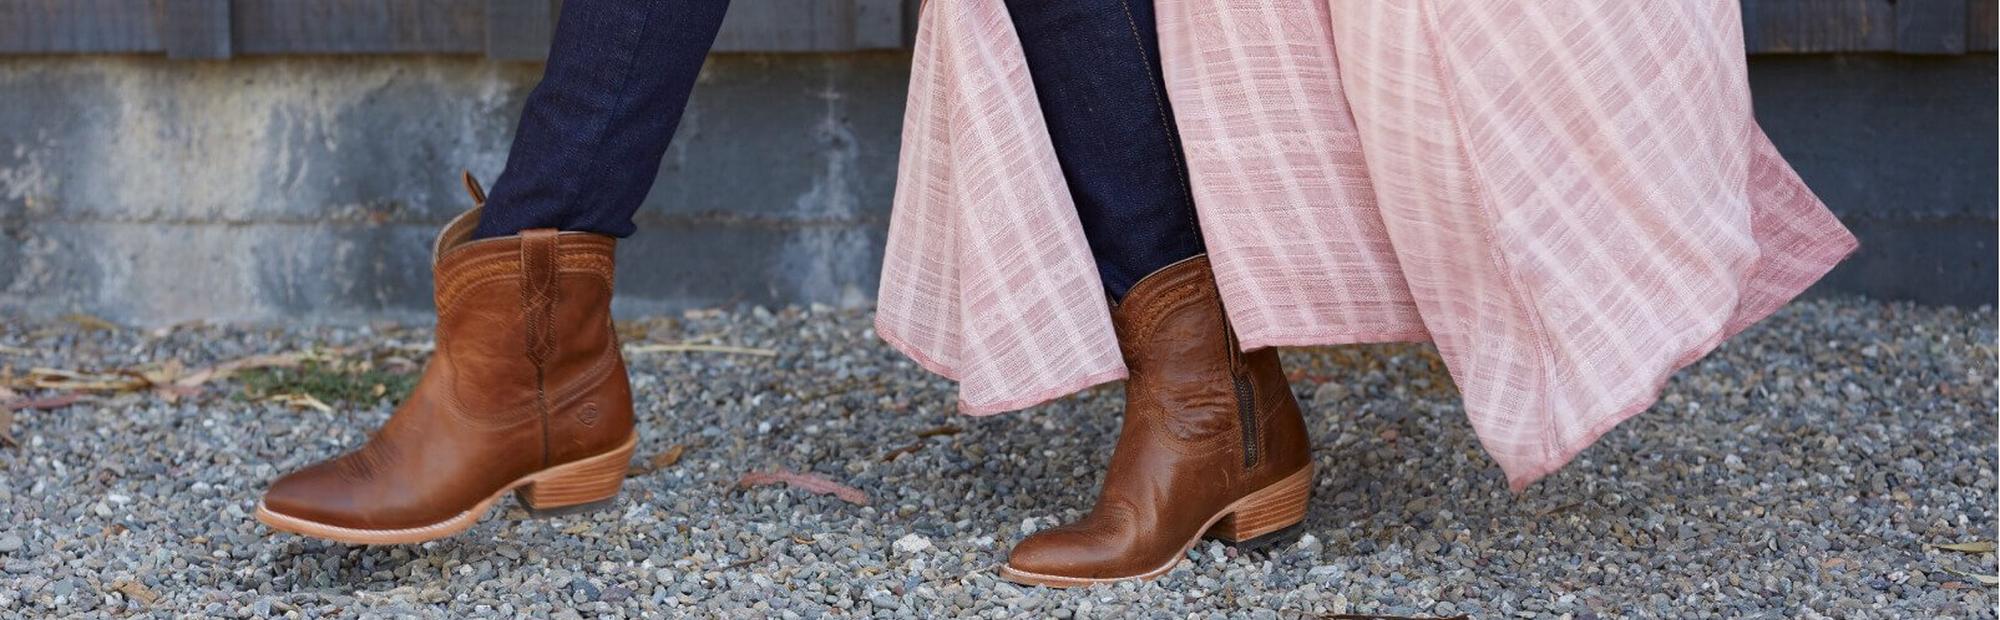 how to wear cowgirl boots with jeans